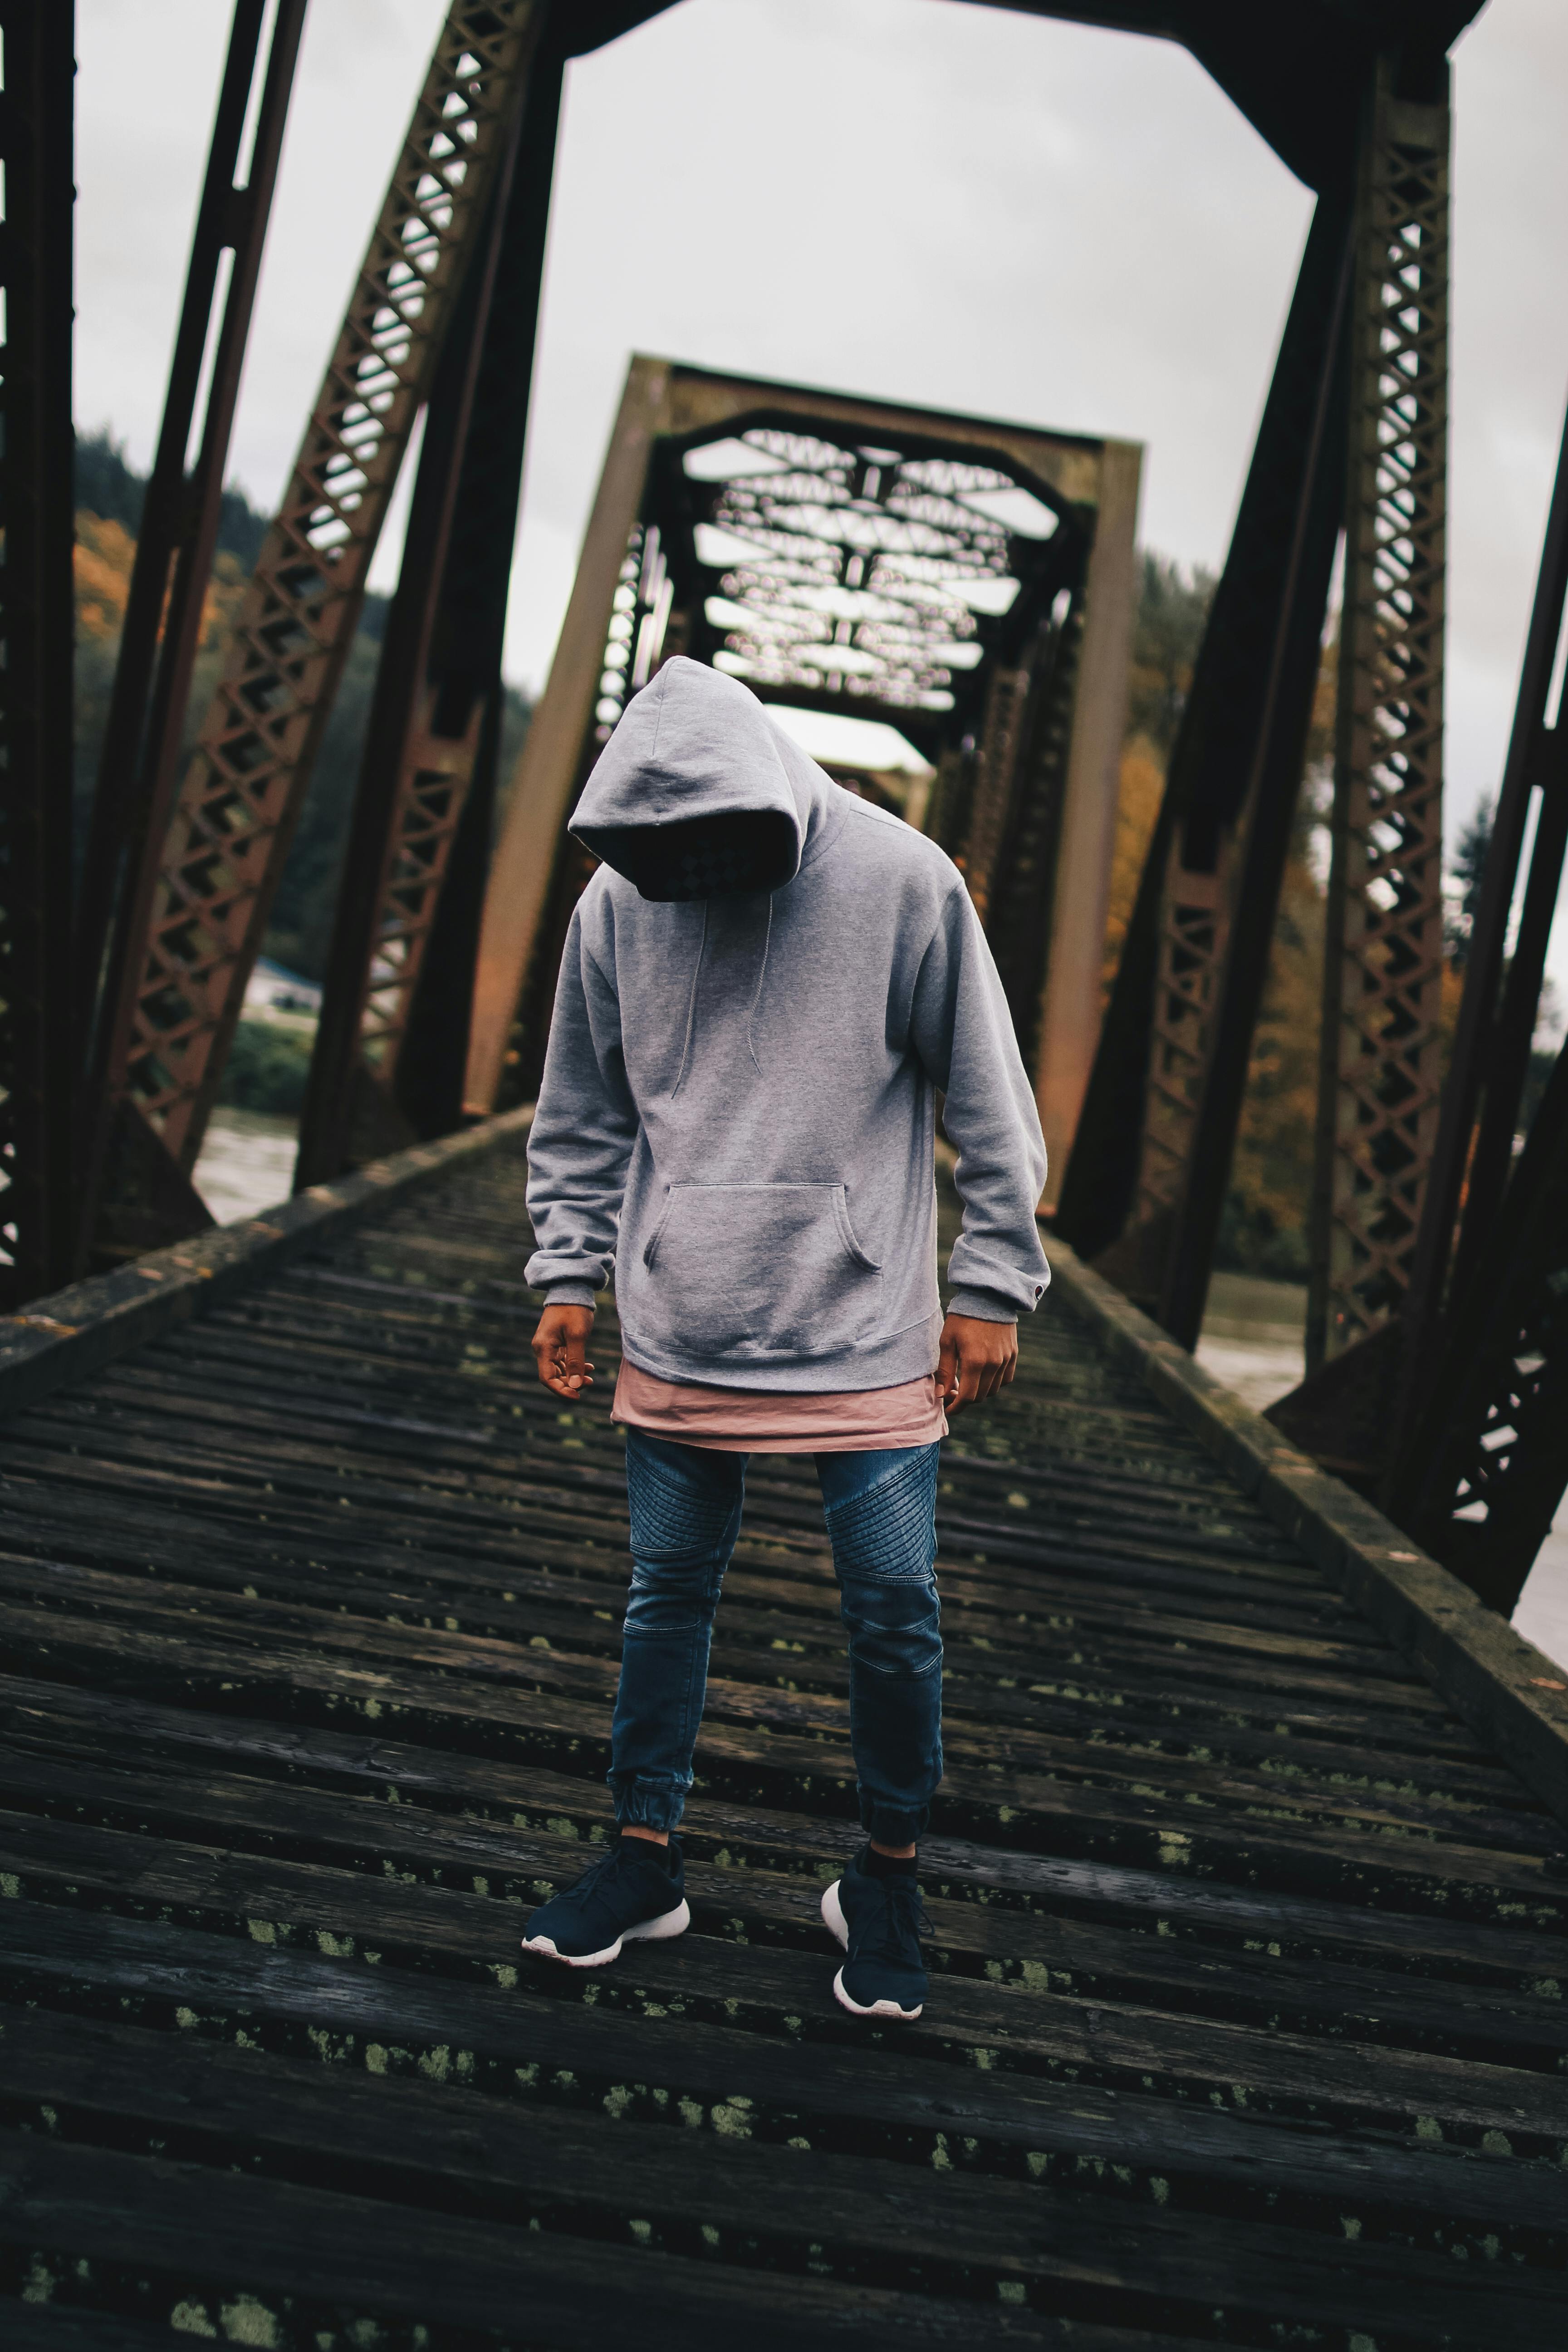 Hoodie Photos, Download The BEST Free Hoodie Stock Photos & HD Images